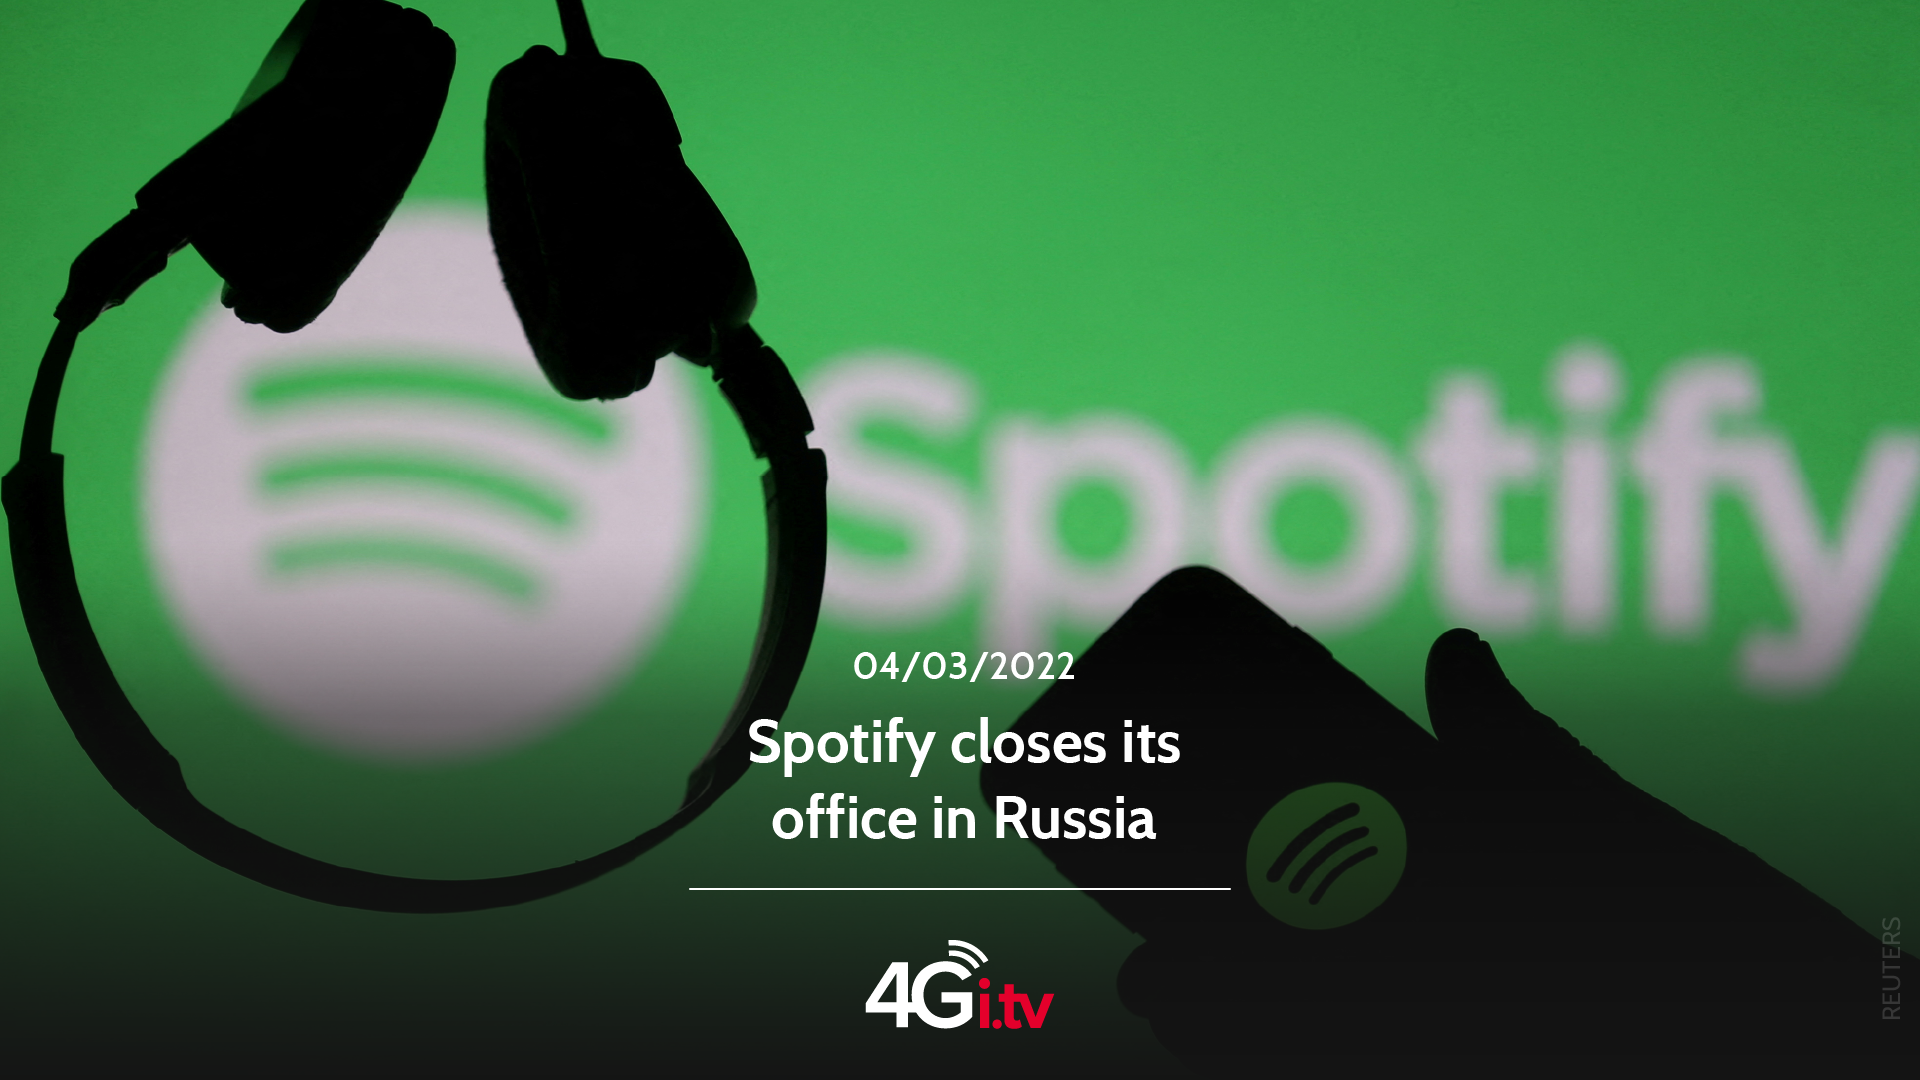 Подробнее о статье Spotify closes its office in Russia